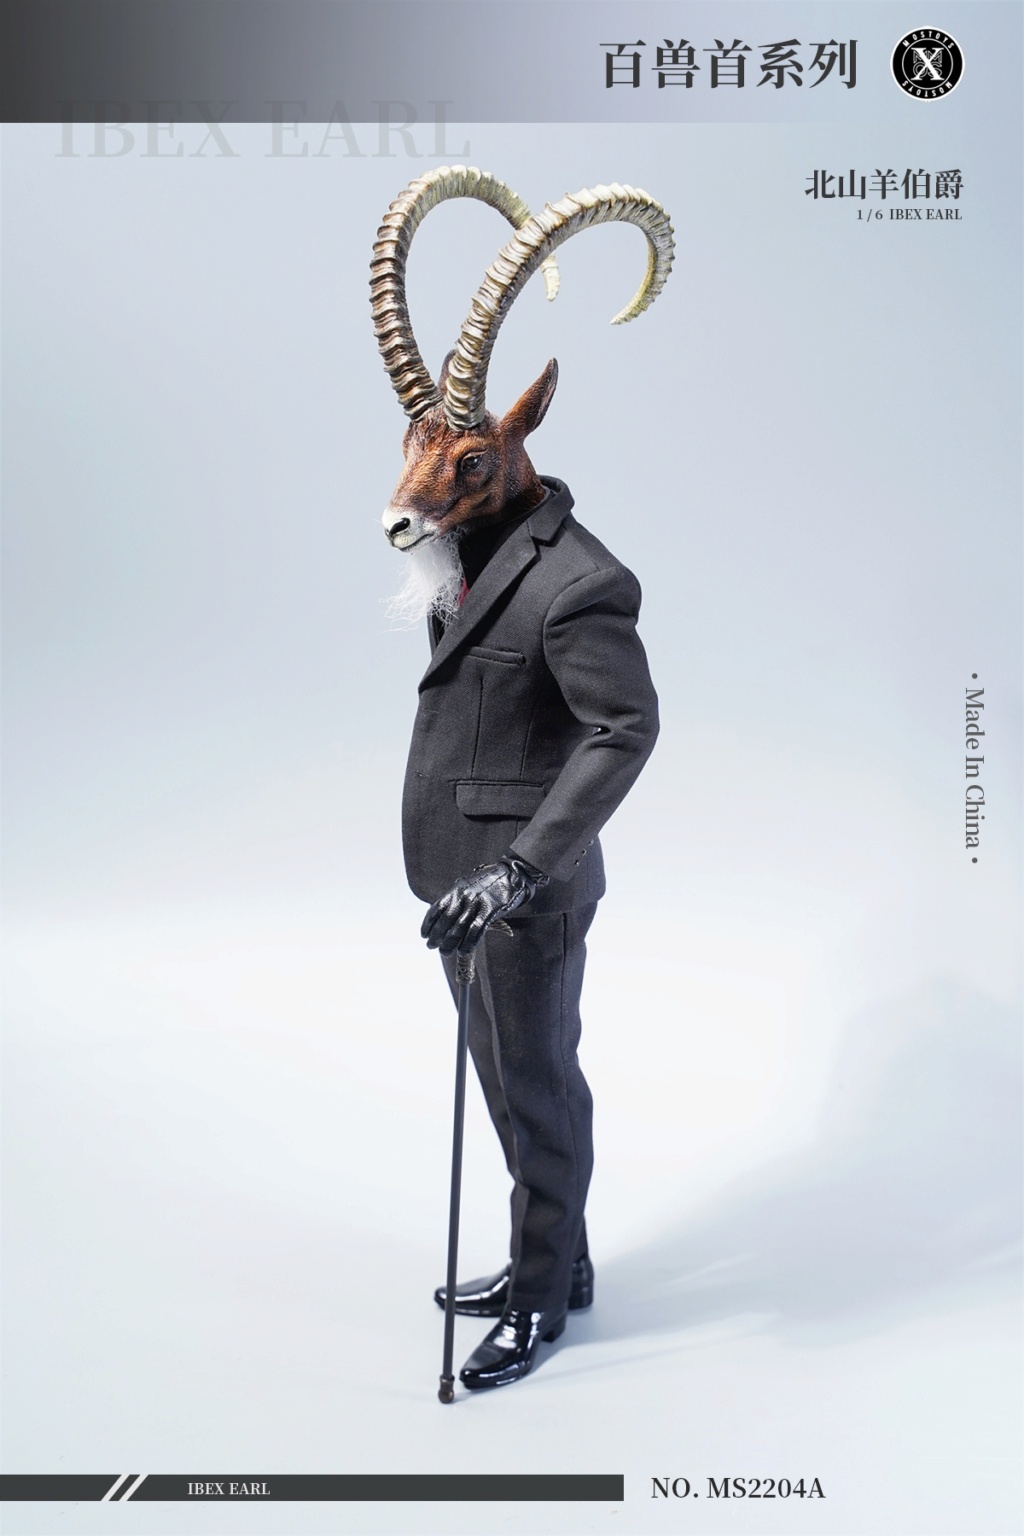 Mostoys - NEW PRODUCT: MosToys: 1/6 Hundred Beast Head Sculpture Series - Ibex Earl action figure with diorama base 16072510